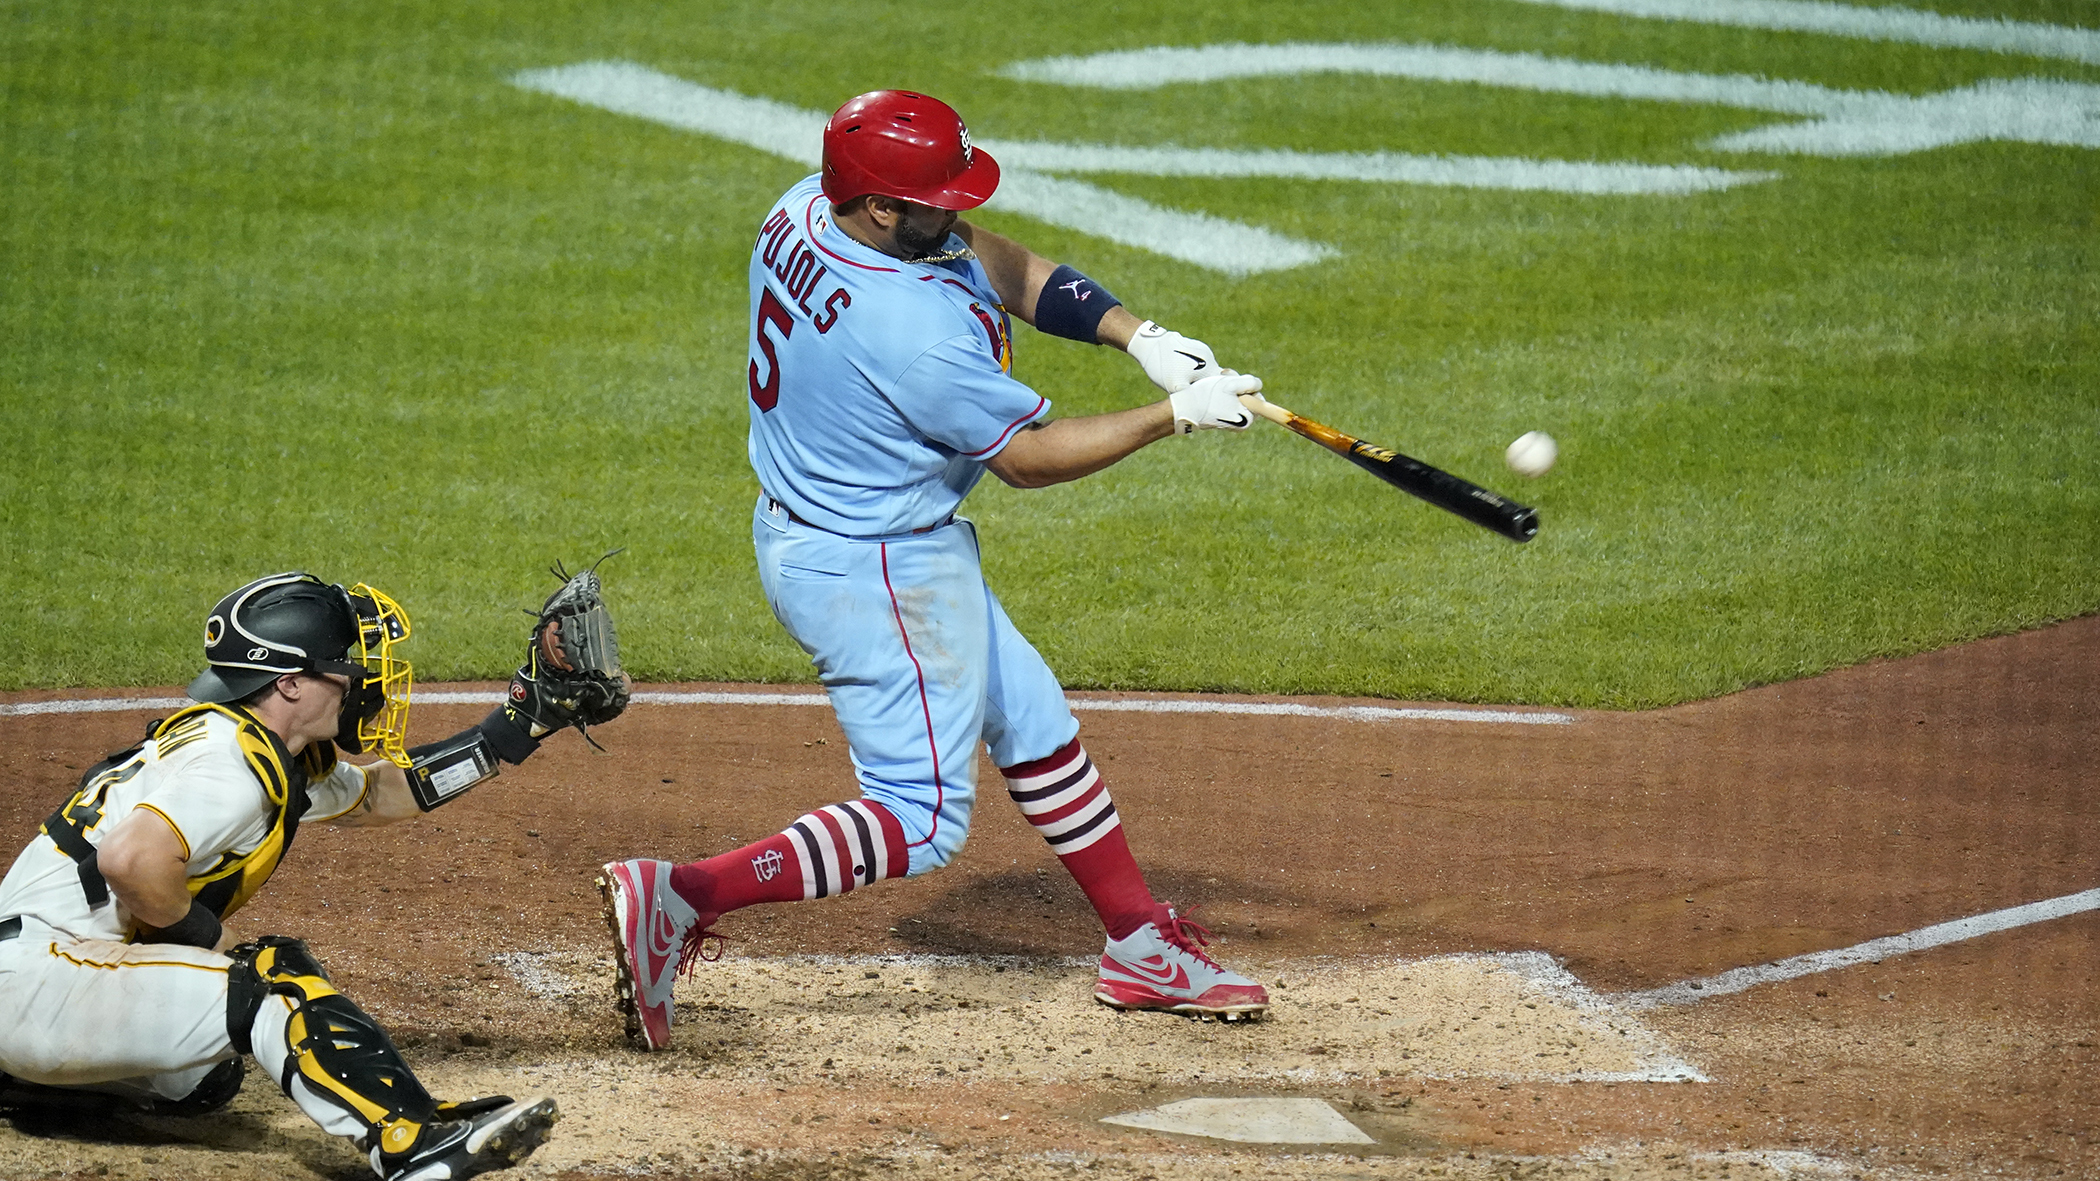 Pujols' chase for 700 HRs will 'probably go down to the wire